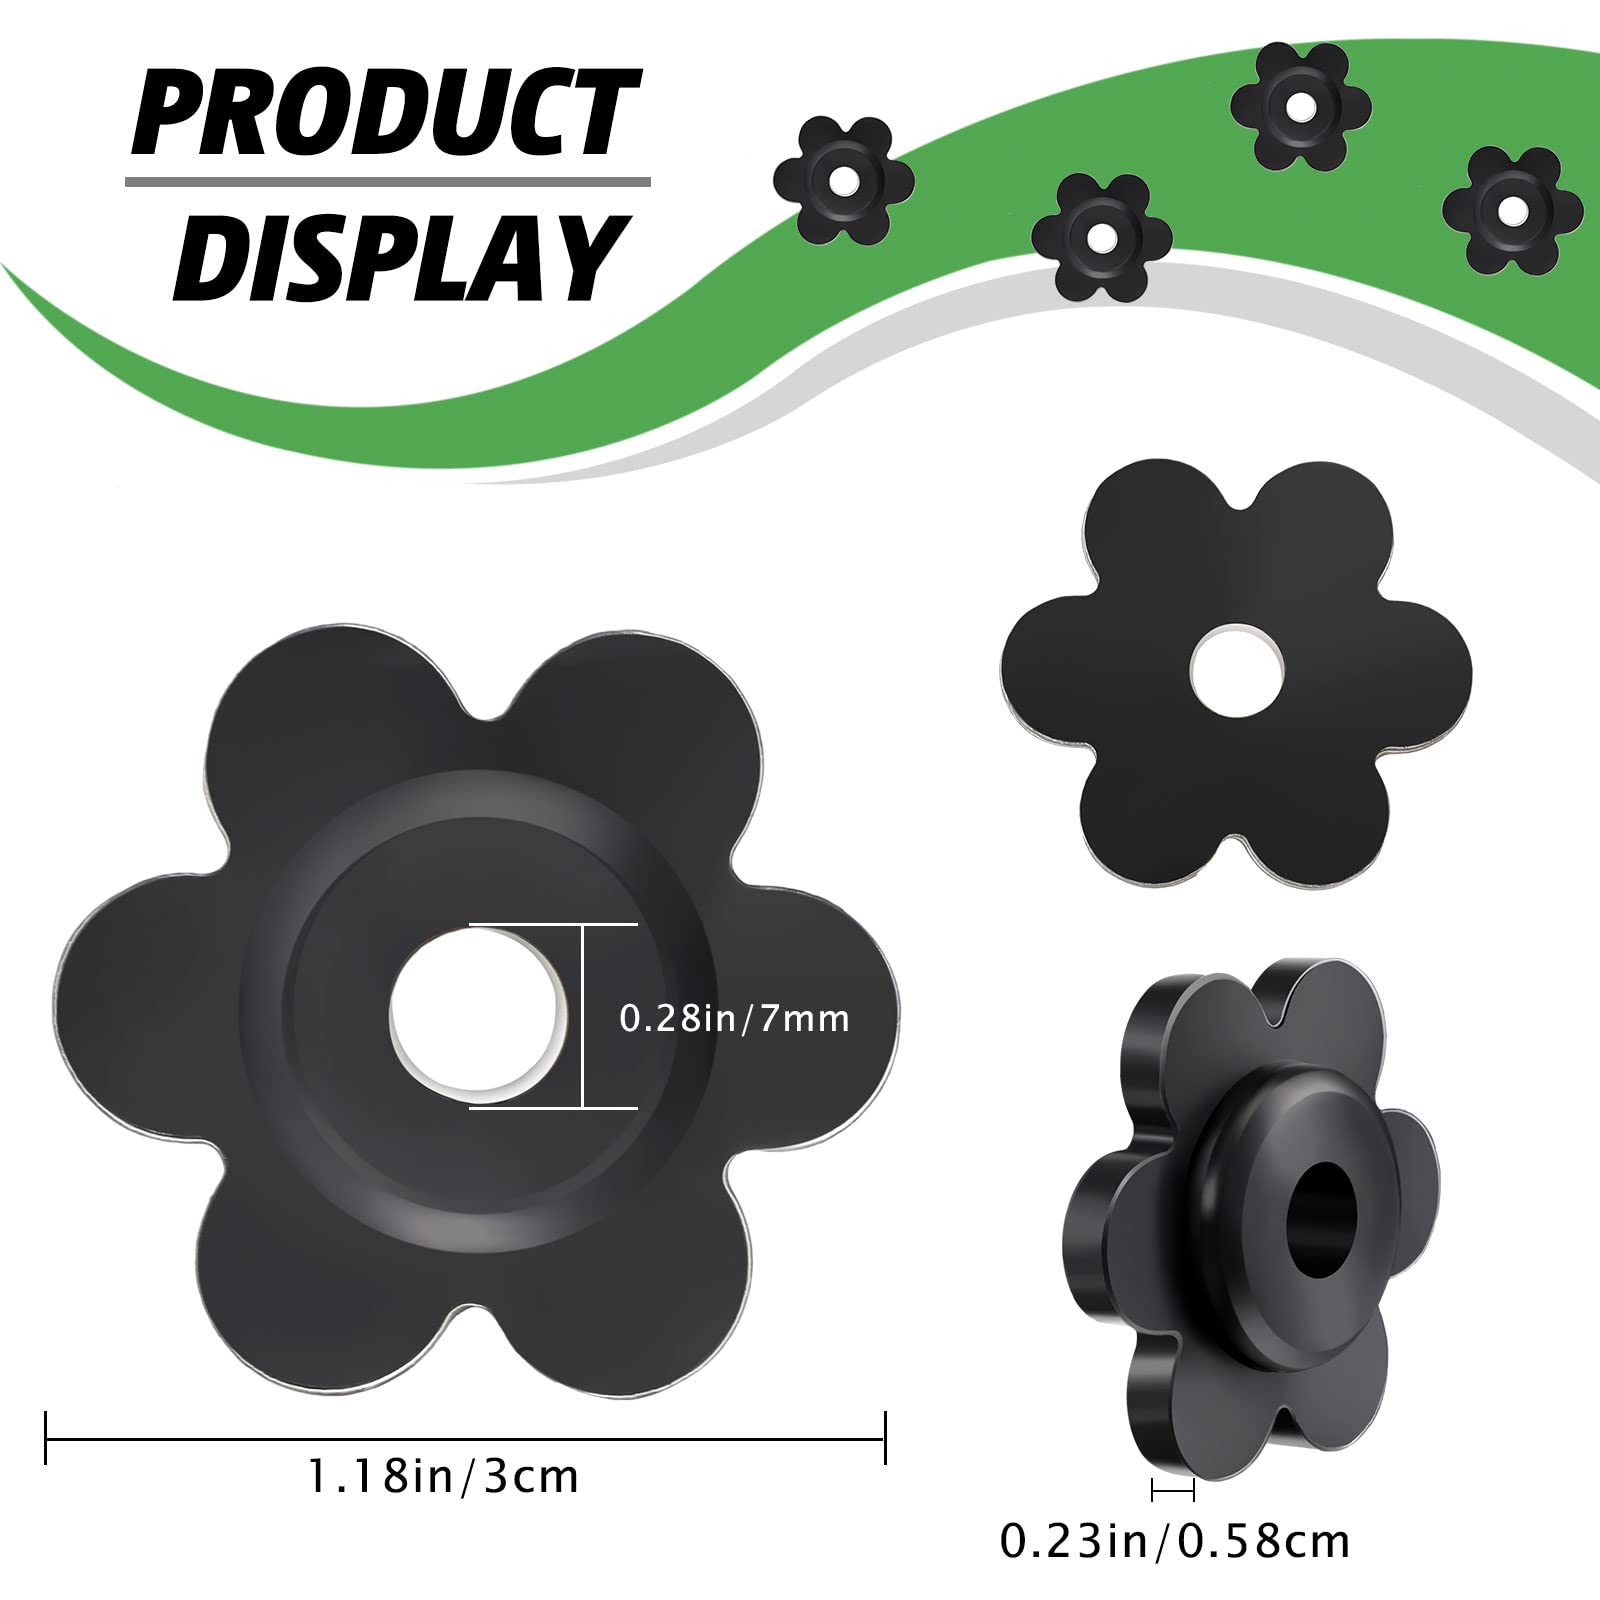 12 Pcs Garden Flag Rubber Stoppers Christmas Yard Flag Stands Black Flower Shape Flag Pole Stopper for Lawn Flags Stands Holder for Indoor and Outdoor Flag Pole Stand